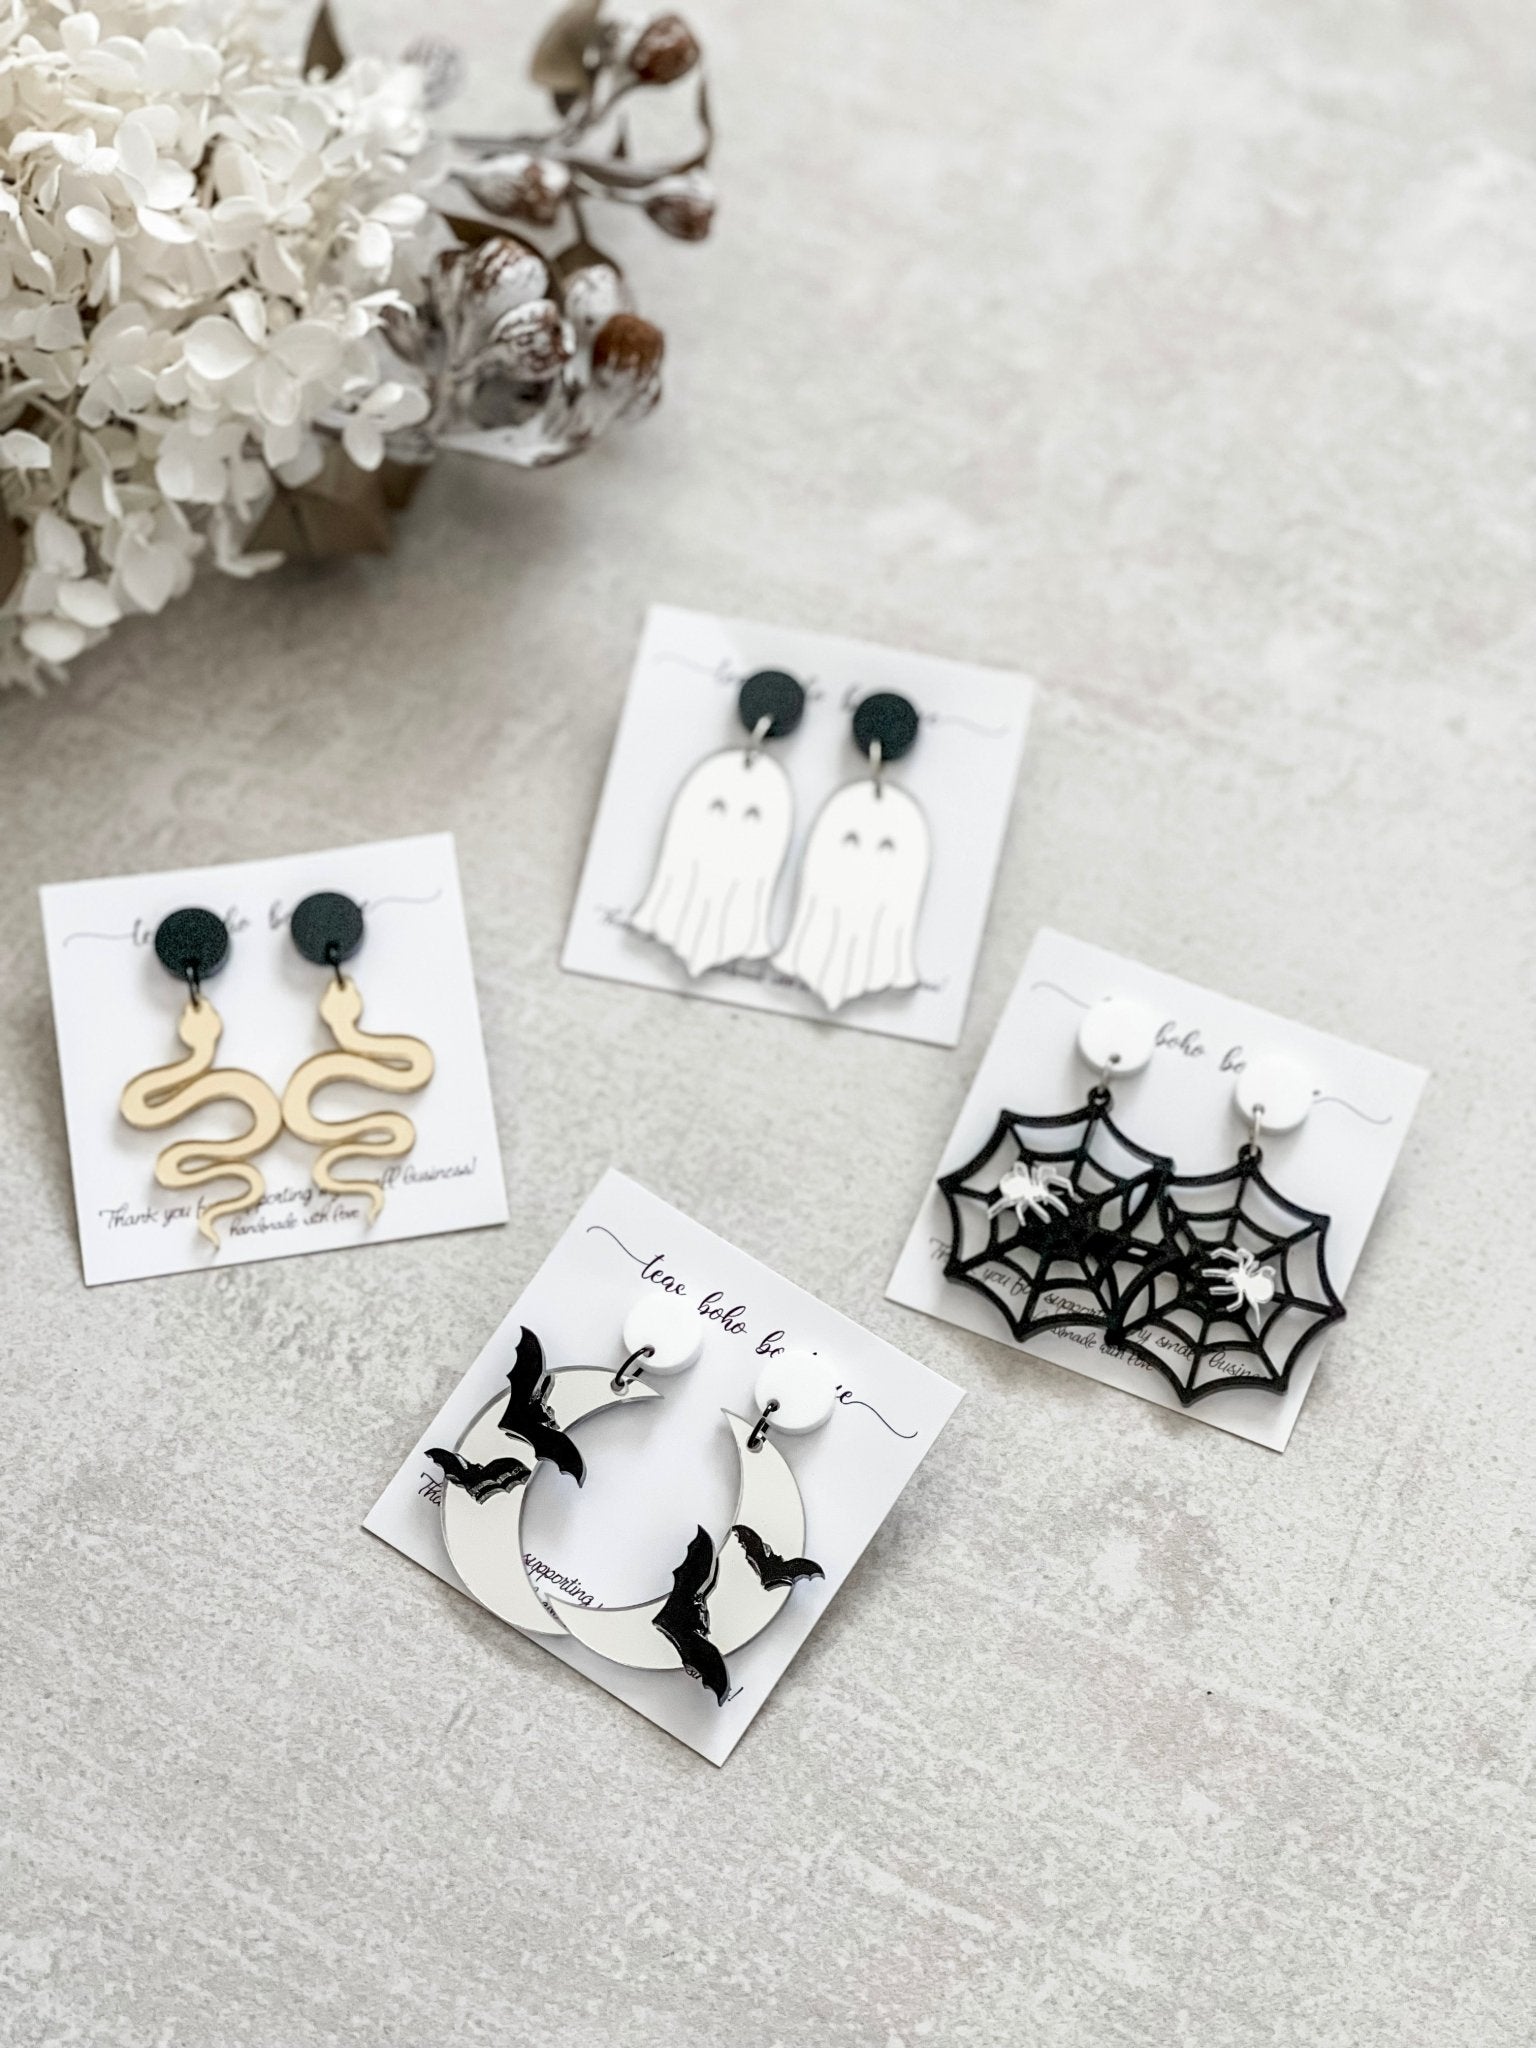 Spider Web Earrings - The Humble Gift Co.